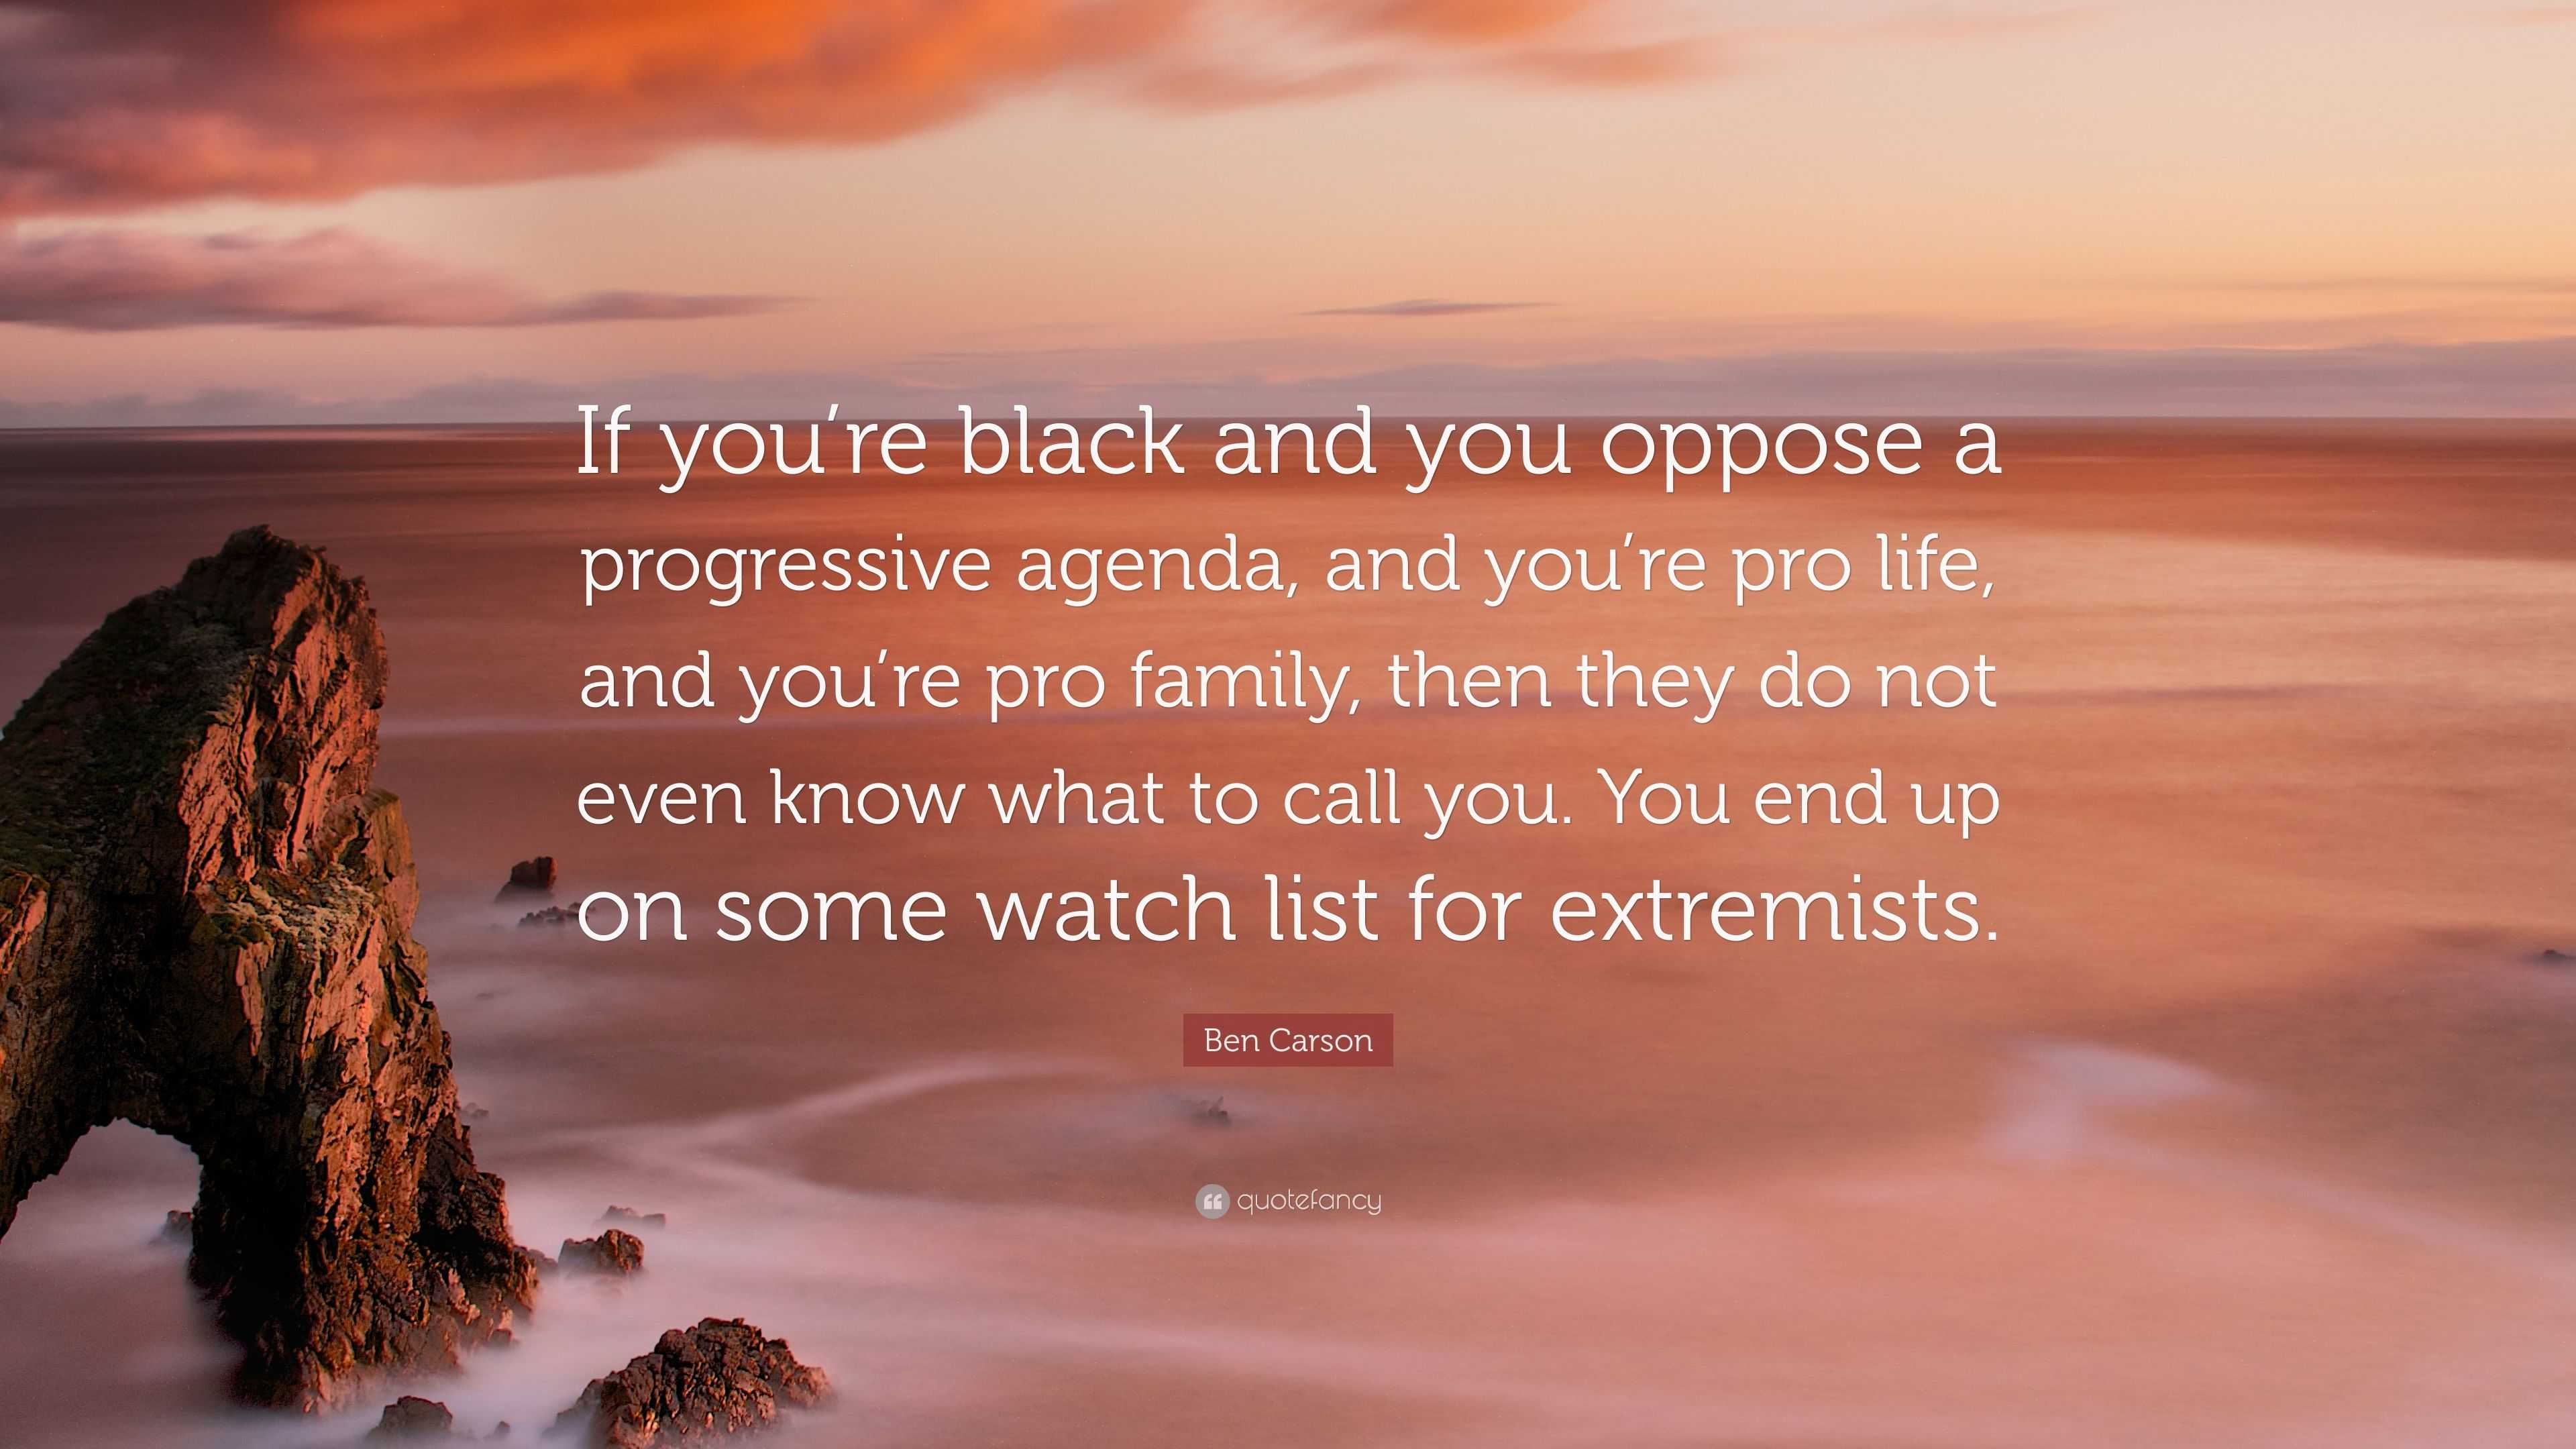 Ben Carson Quote “If you’re black and you oppose a